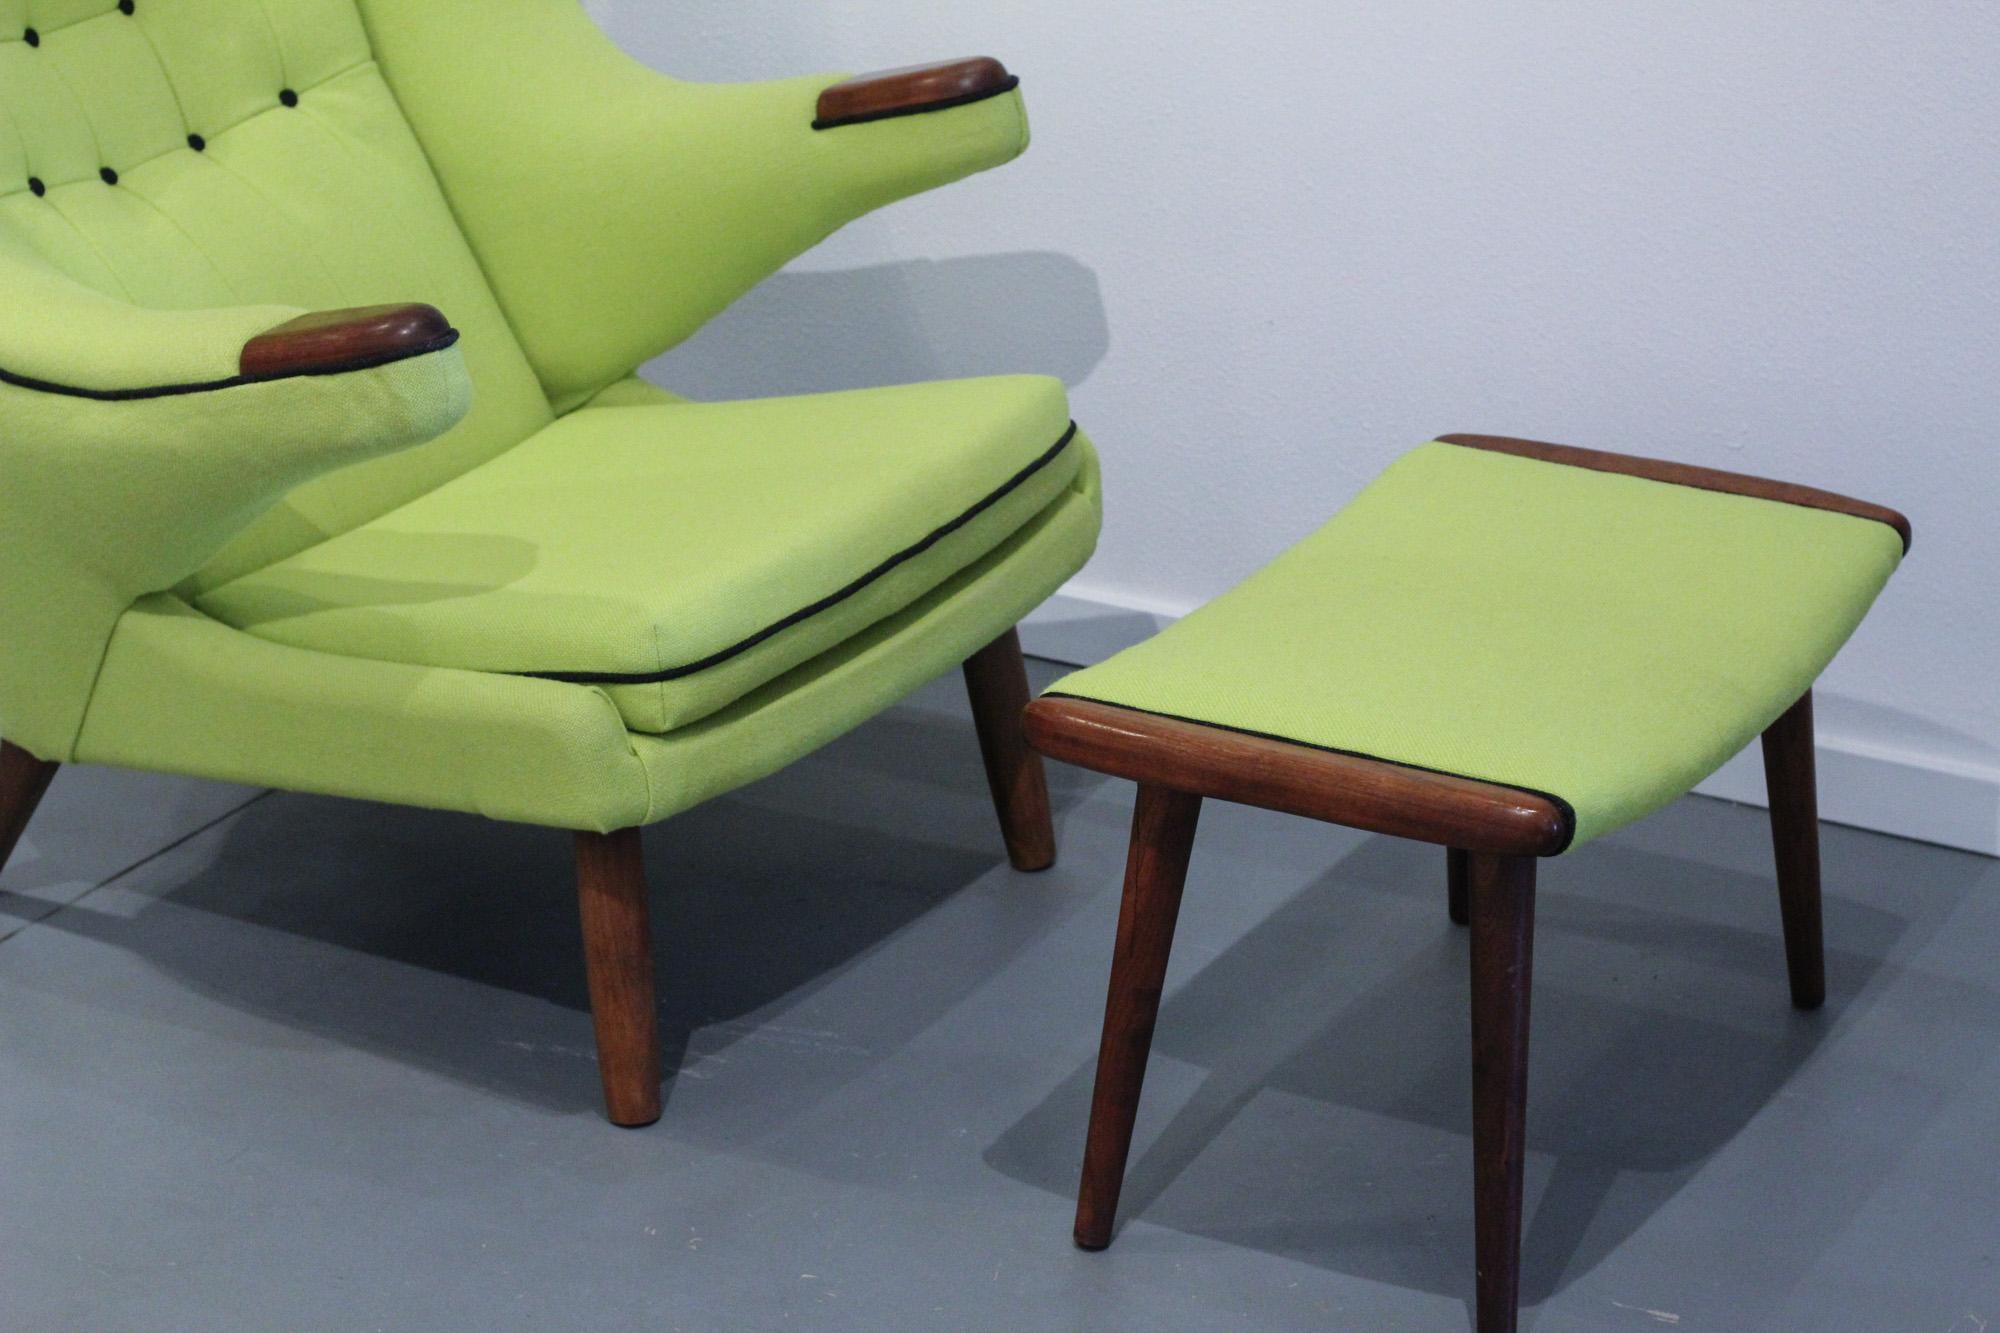 Stunning Danish modern lounge chair and ottoman manufactured by Danica Domus in 1969 in the style of mid century modern iconic Hans J Wegner Papa Bear chair 

Chair was purchased by previous owner in Denmark and upholstered in Kvadrat Maharam